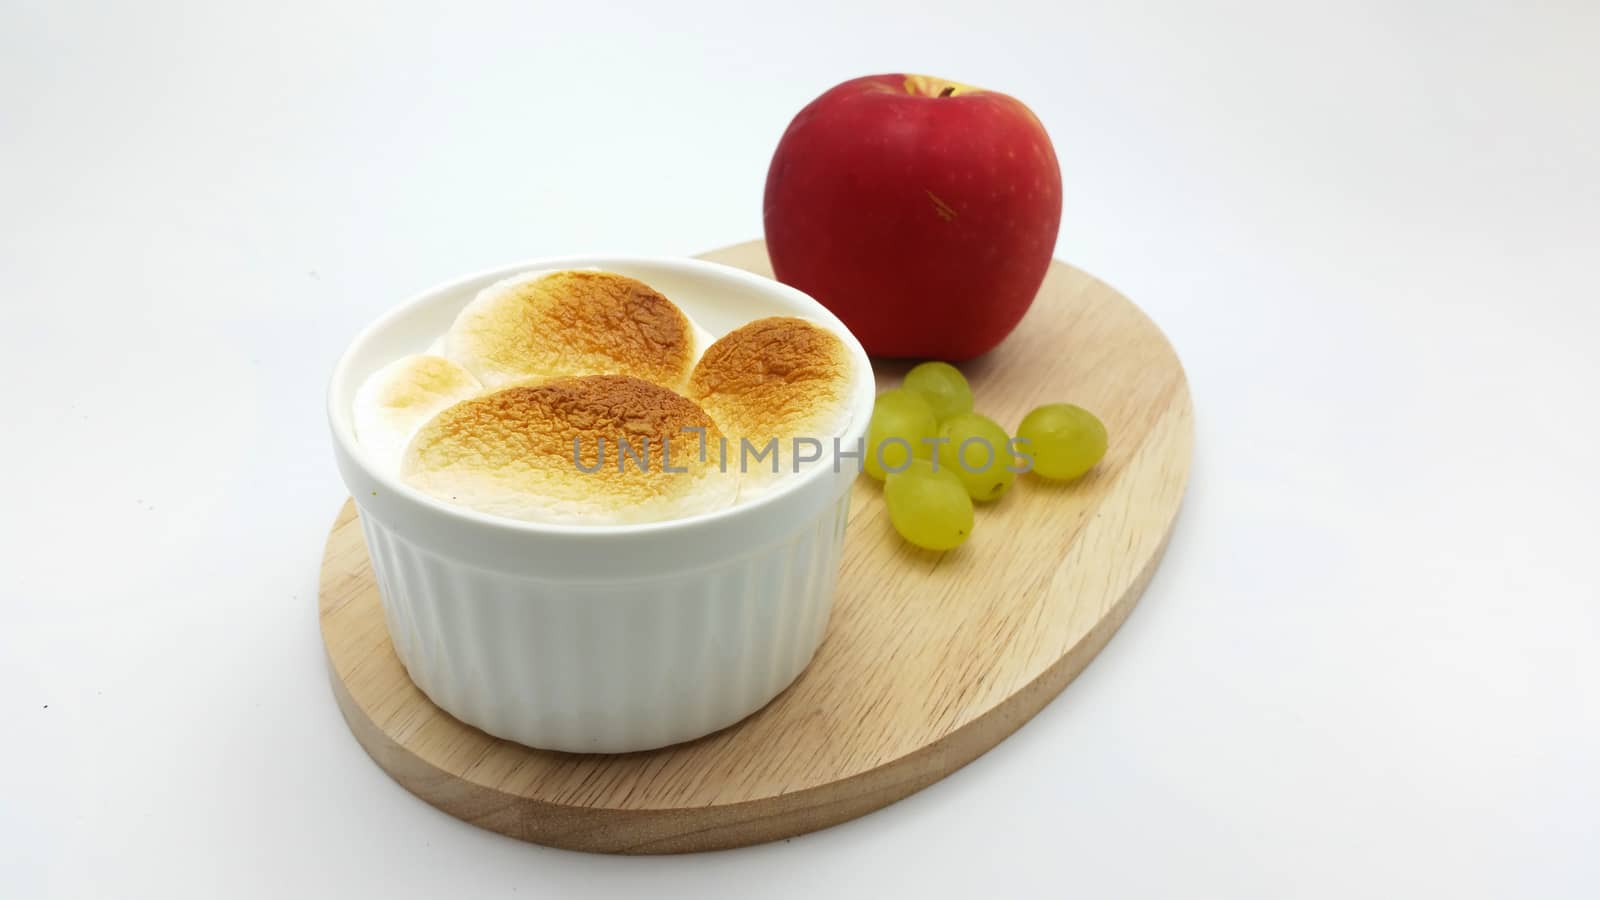 S'More dip with apple and grape on the wooden plate on the white background